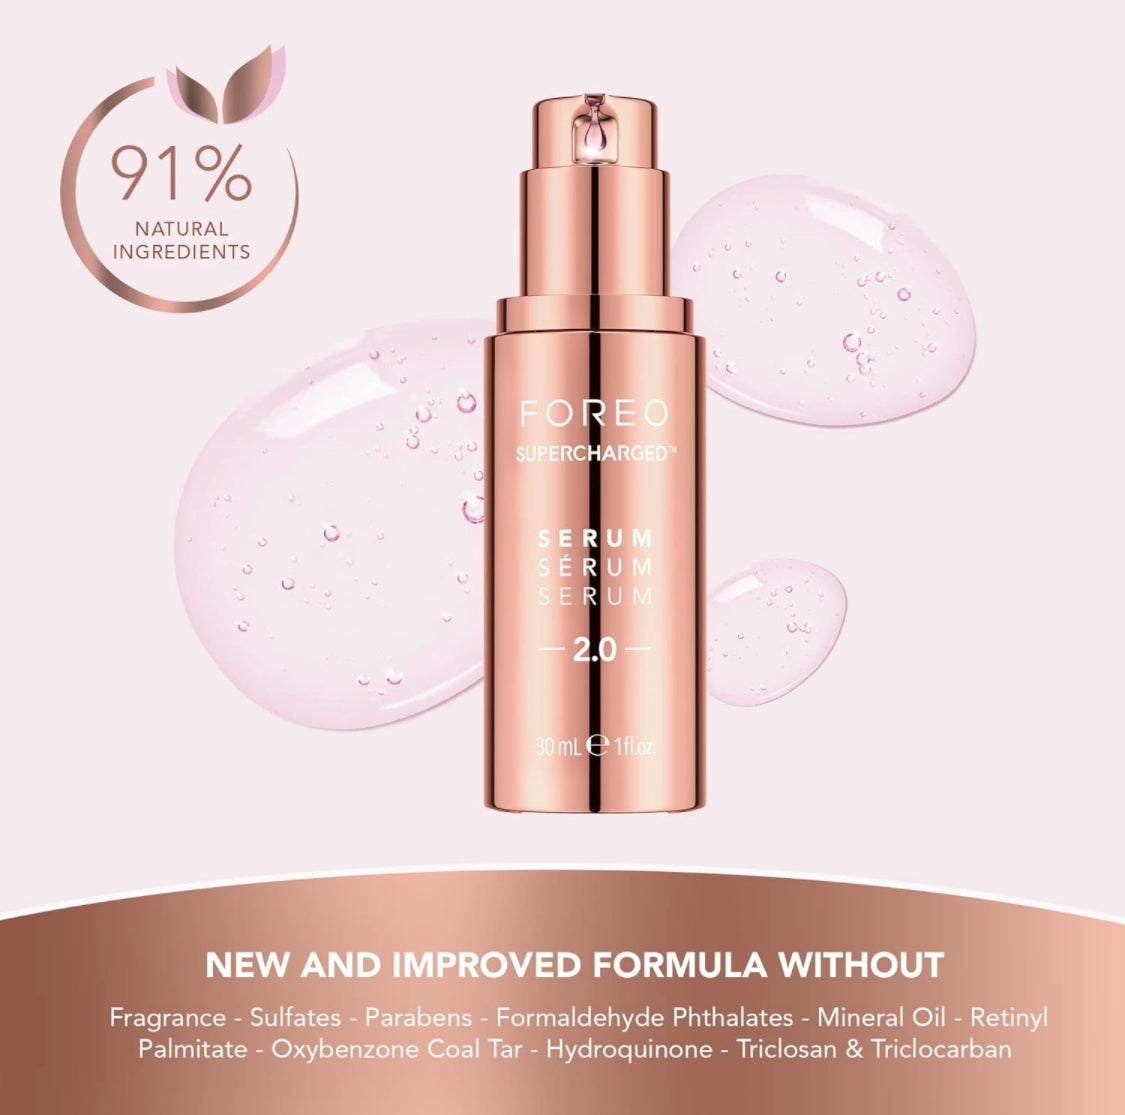 FOREO SUPERCHARGED SERUM 2.0 - Microcurrent Conductive Gel - Hyaluronic Acid Serum for Face - Squalane - Rejuvenating & Hydration - Vegan & Cruelty-free - All Skin Types - 1 fl.oz